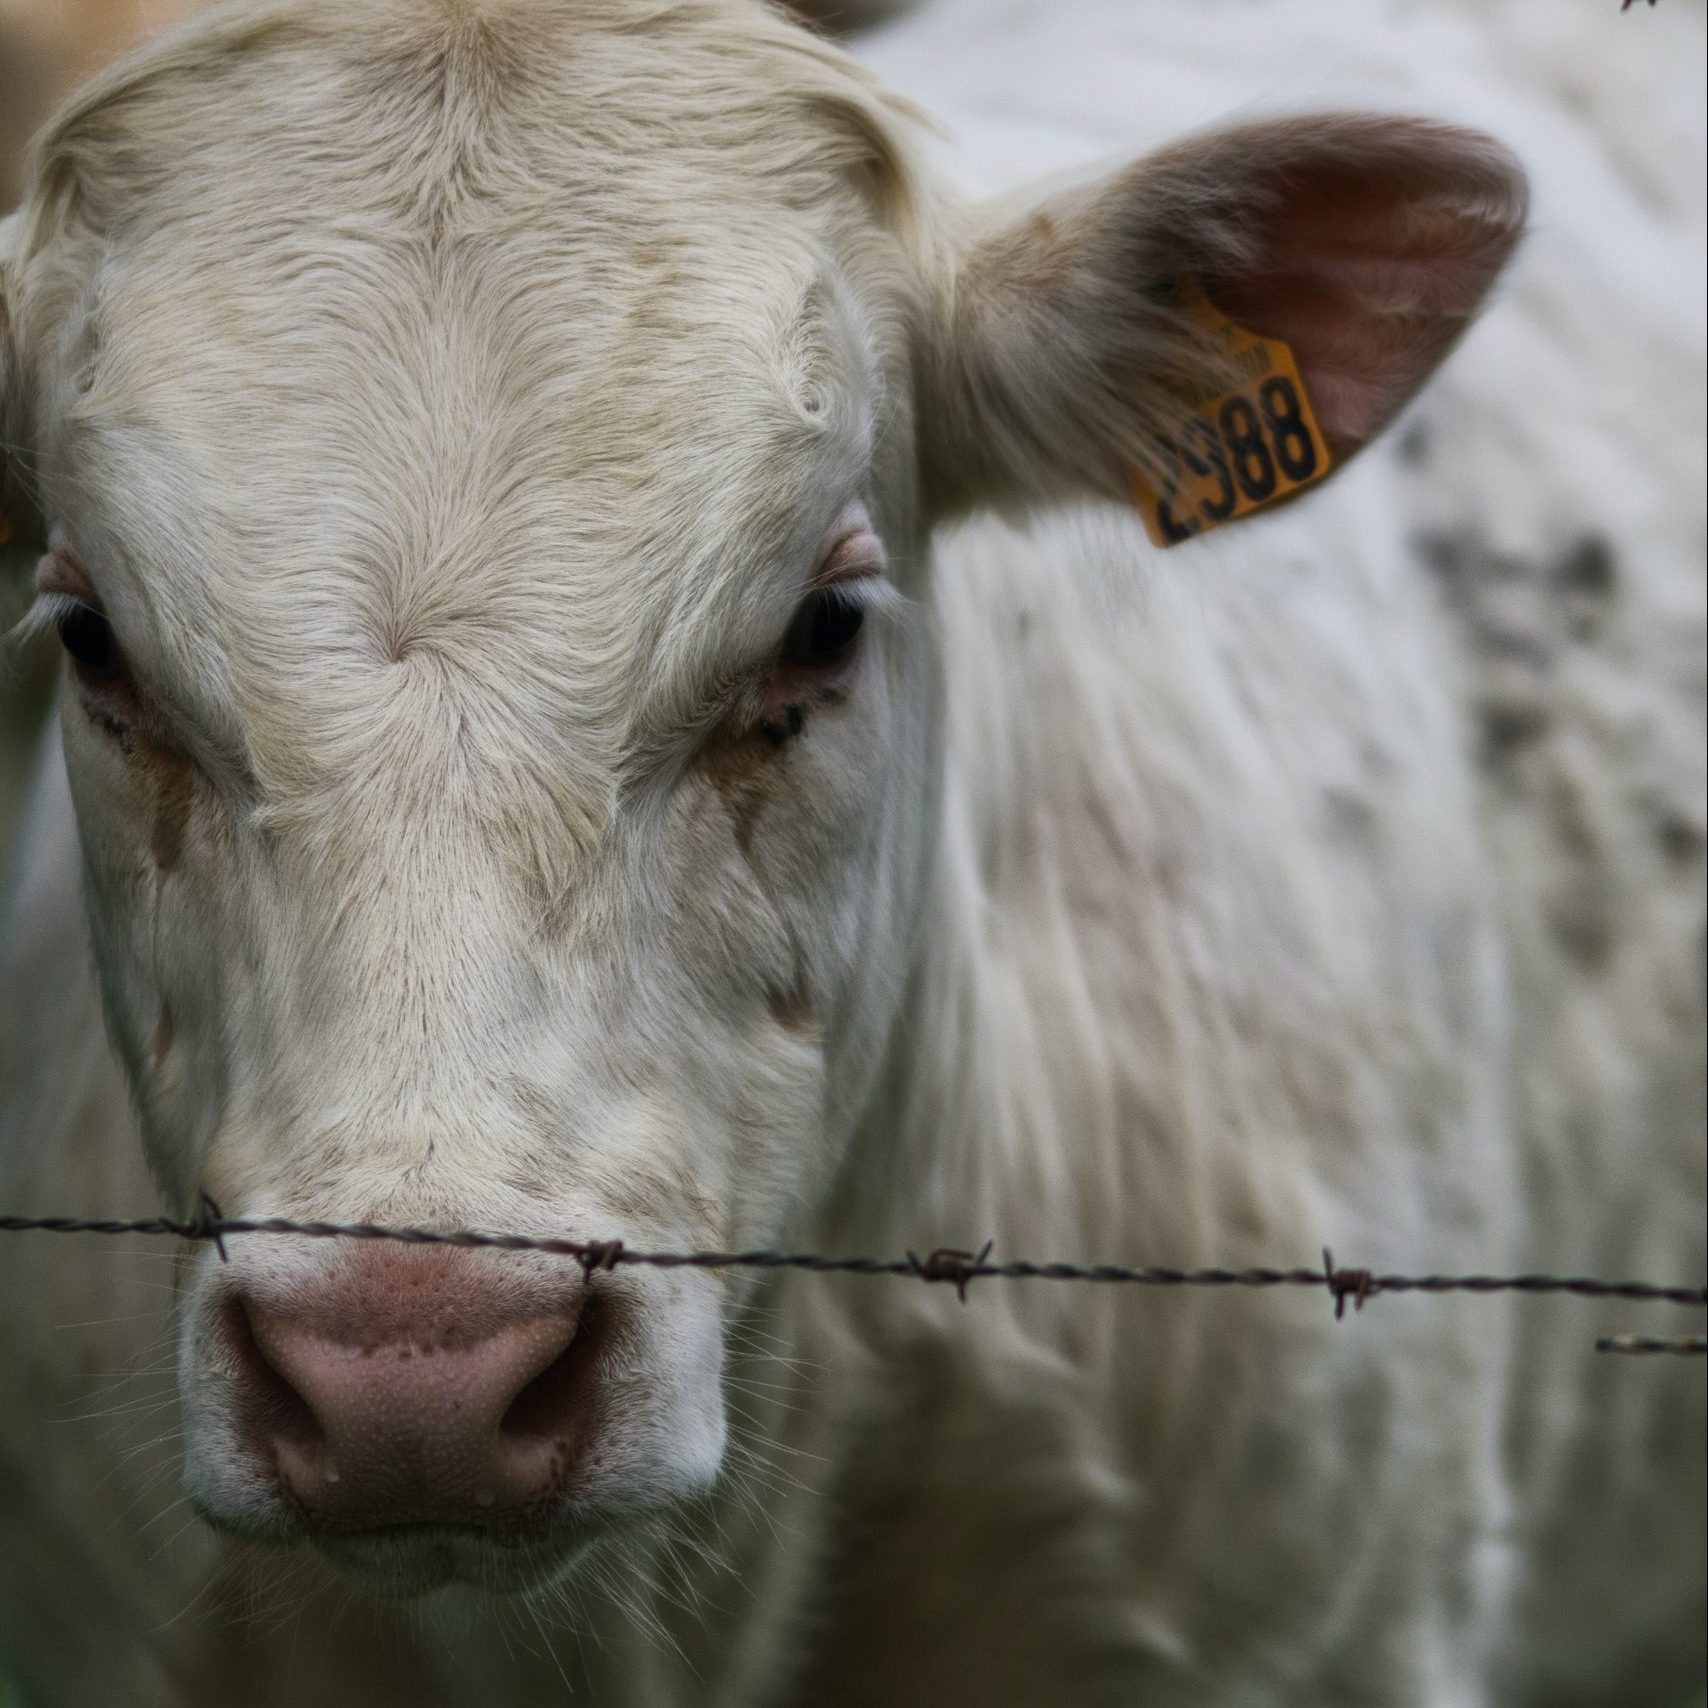 Close up of a cow